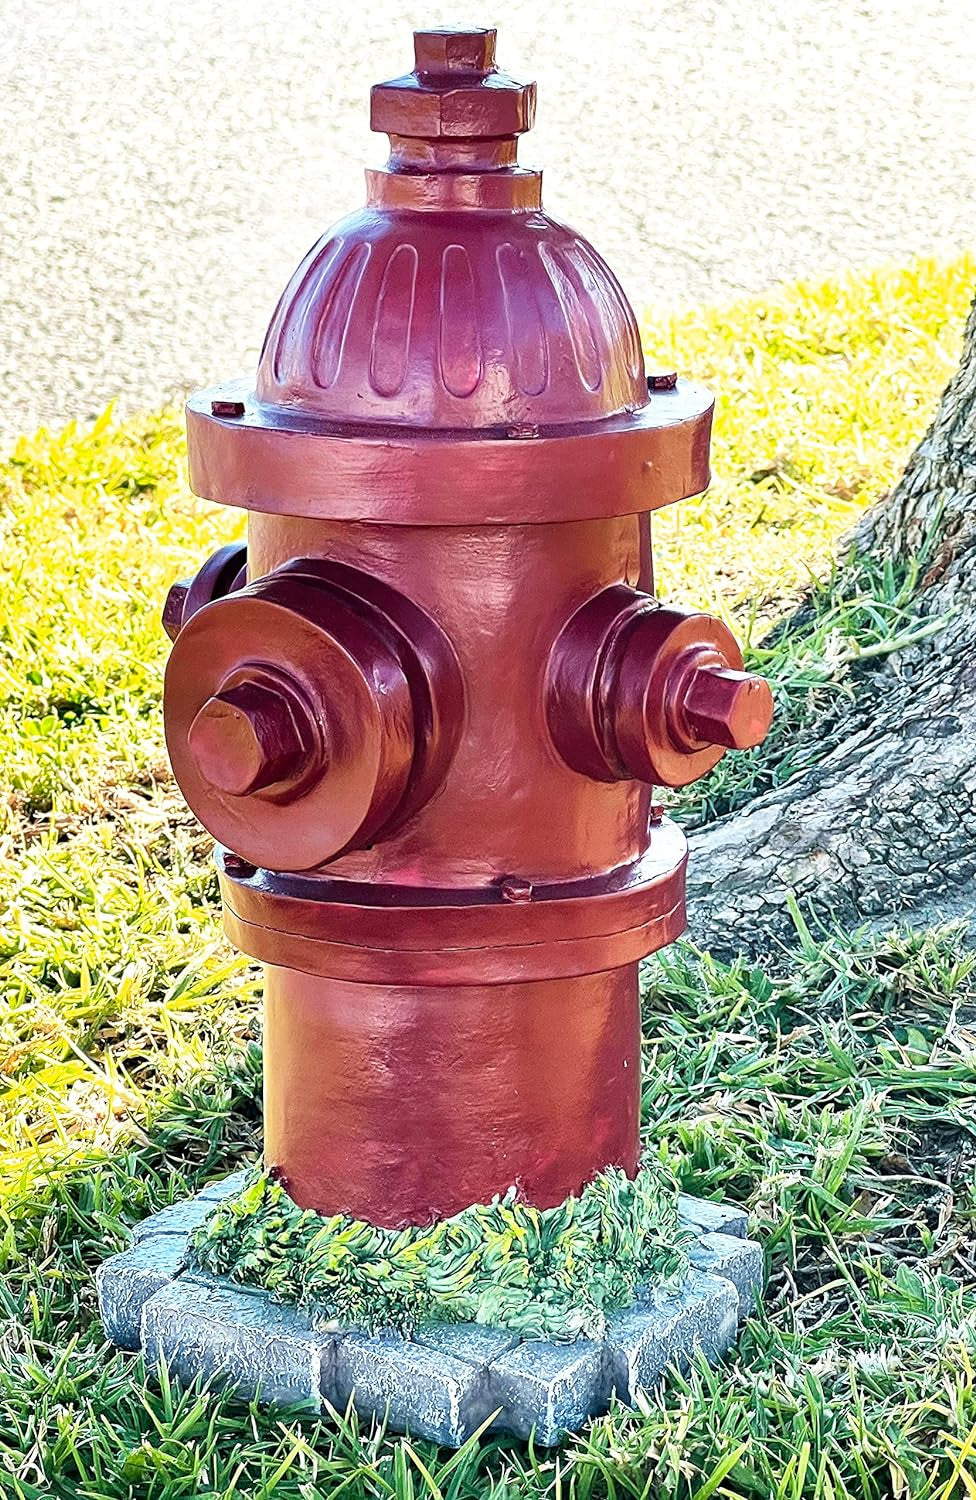 22472 Fire Hydrant Statue Dog Training Lamp Post 14 Inch Indoor Home Outdoor Garden Sculpture Yard Decoration